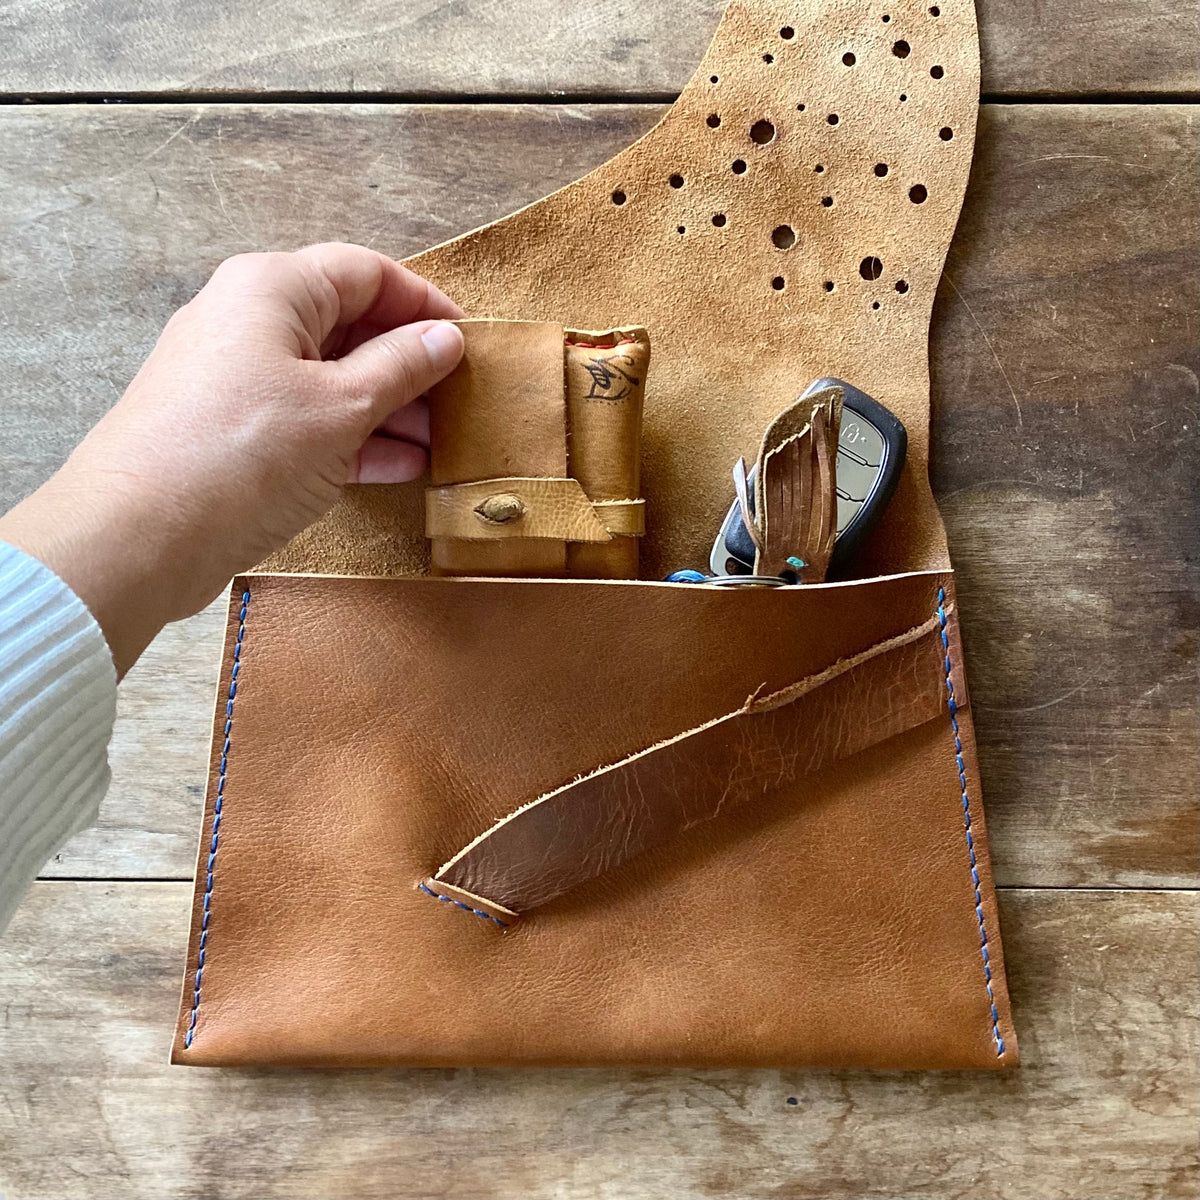 Clutch with keys and wallet to show size 